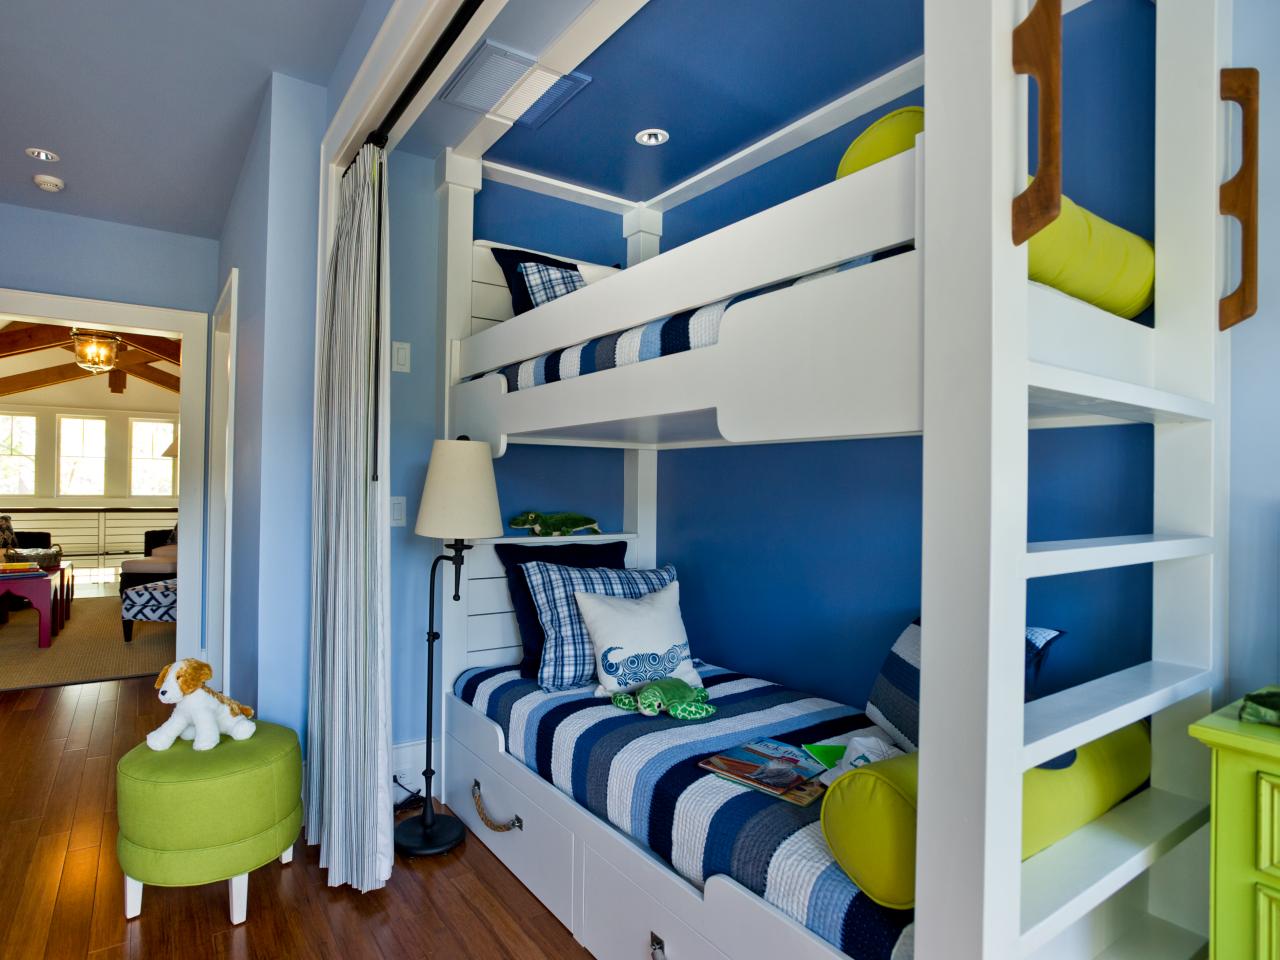 Kids With Theme Bunk Beds, Beach Themed Bunk Beds